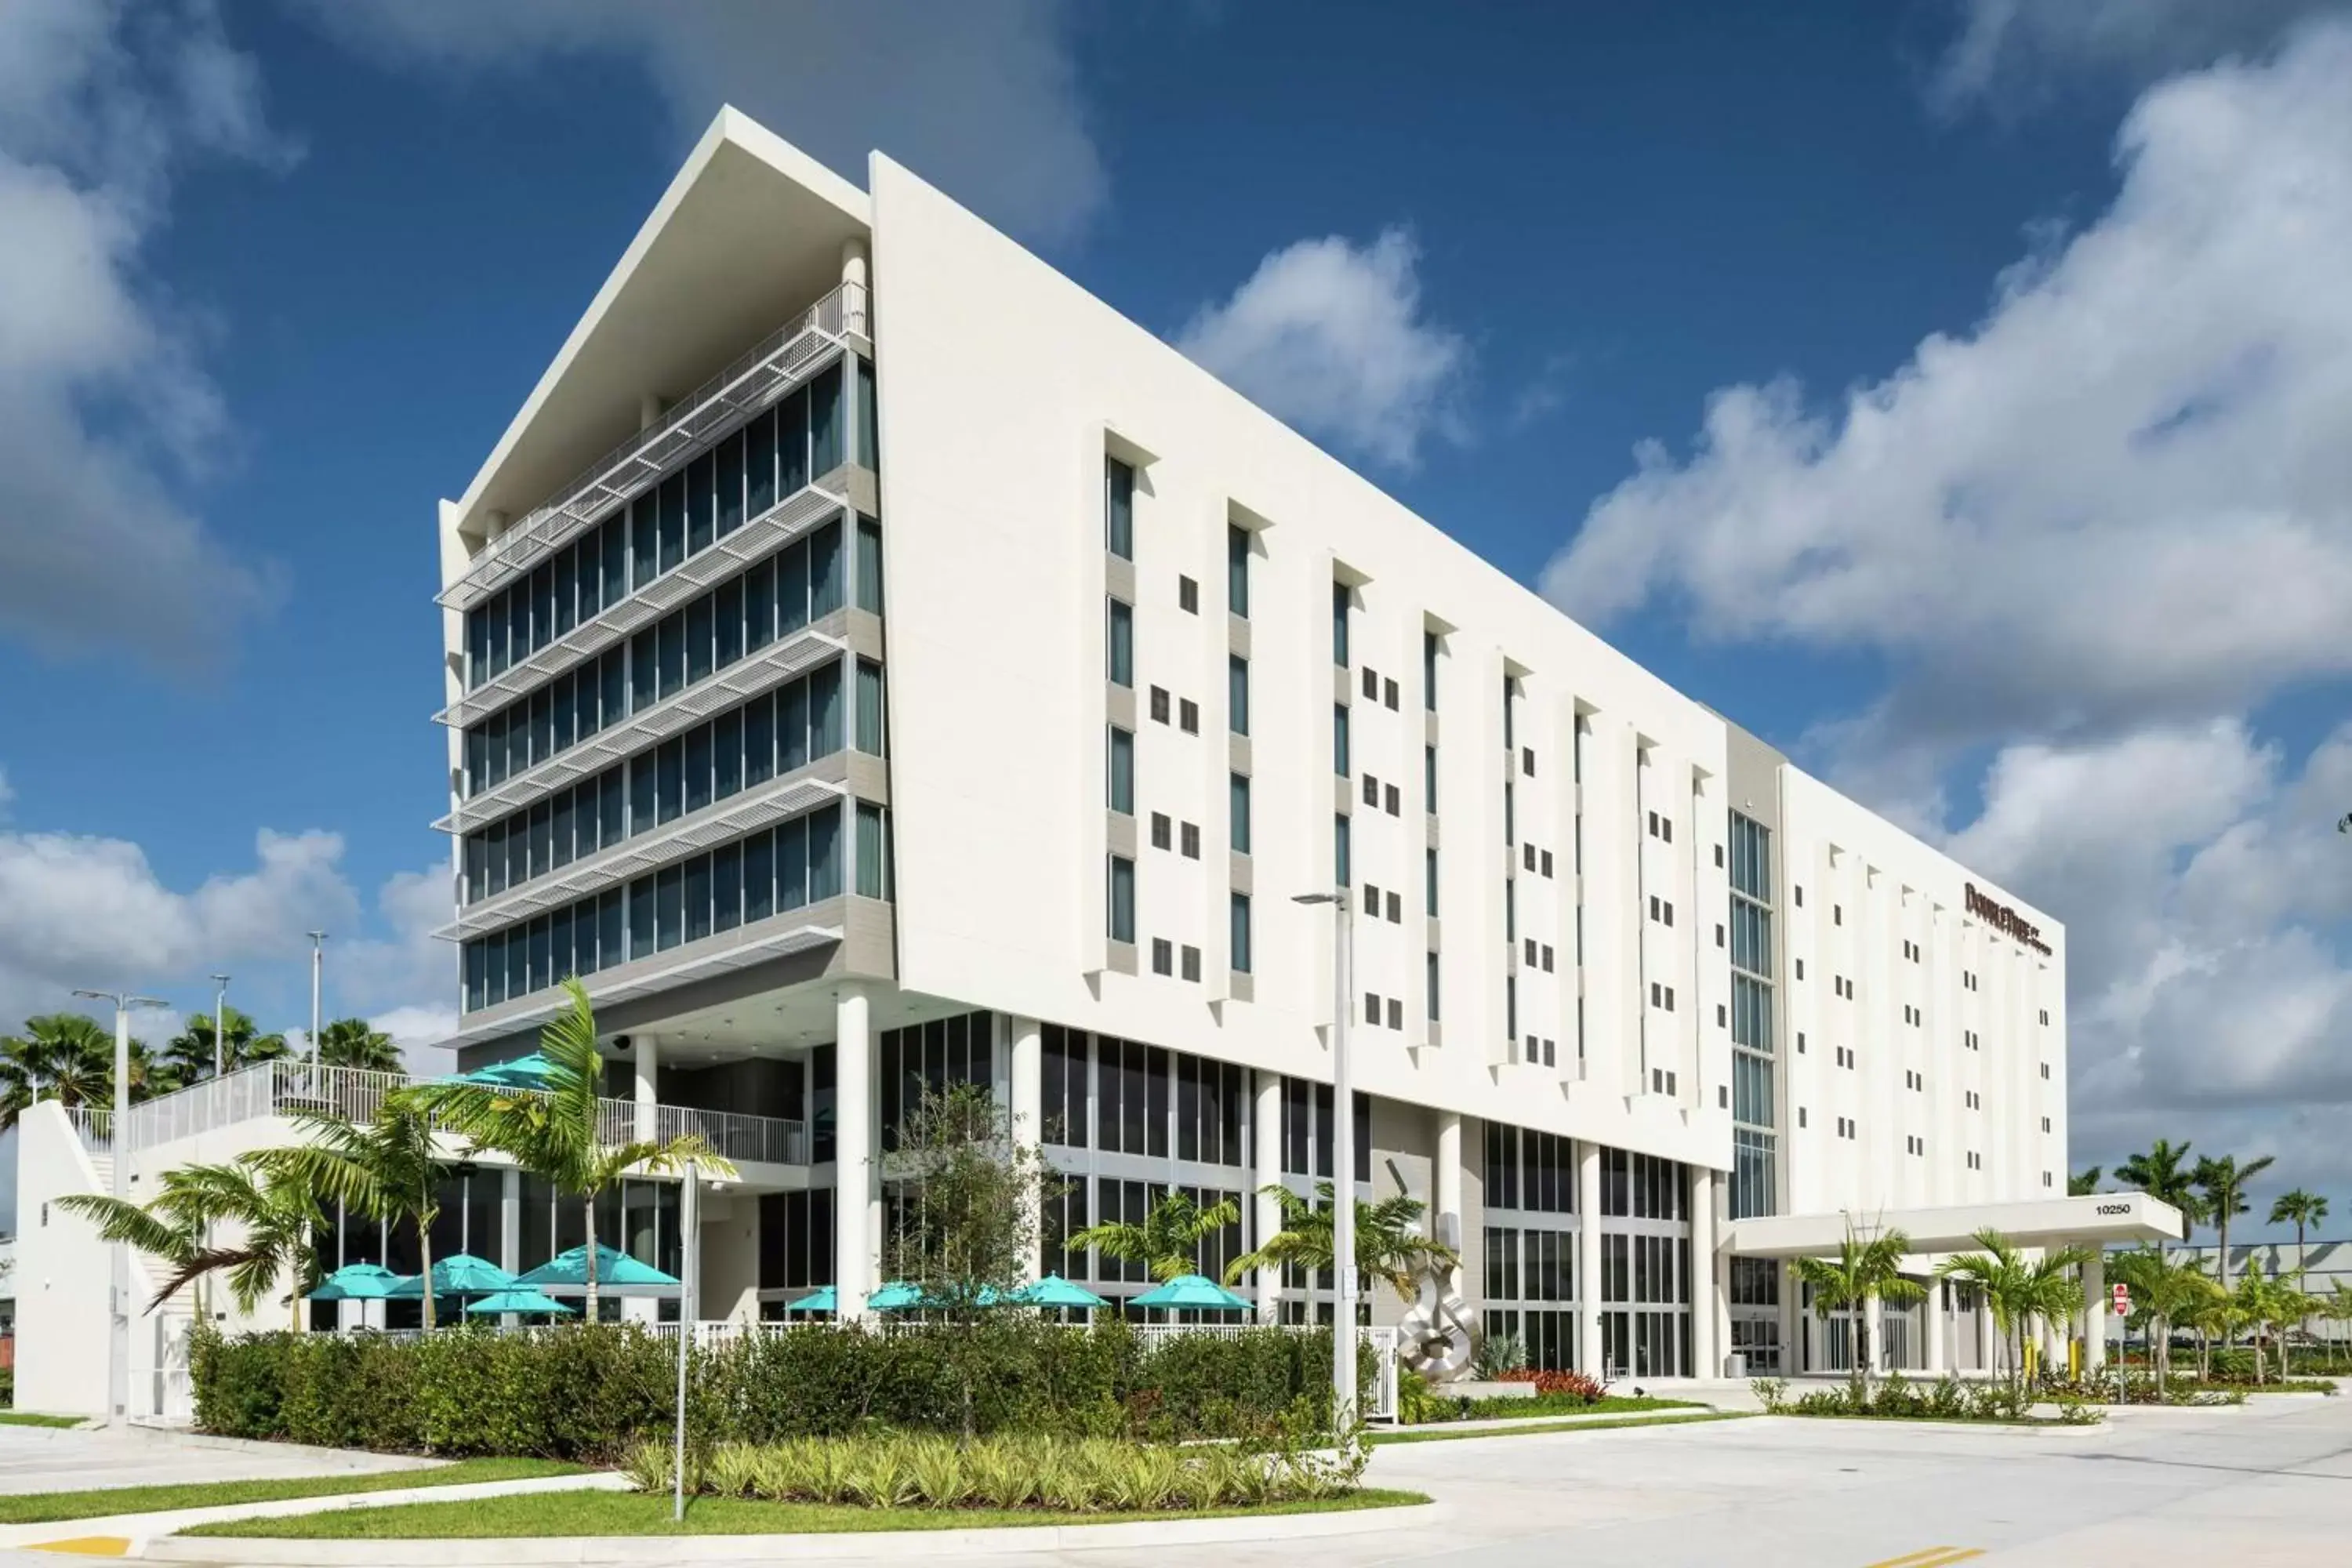 Property Building in DoubleTree by Hilton Miami Doral